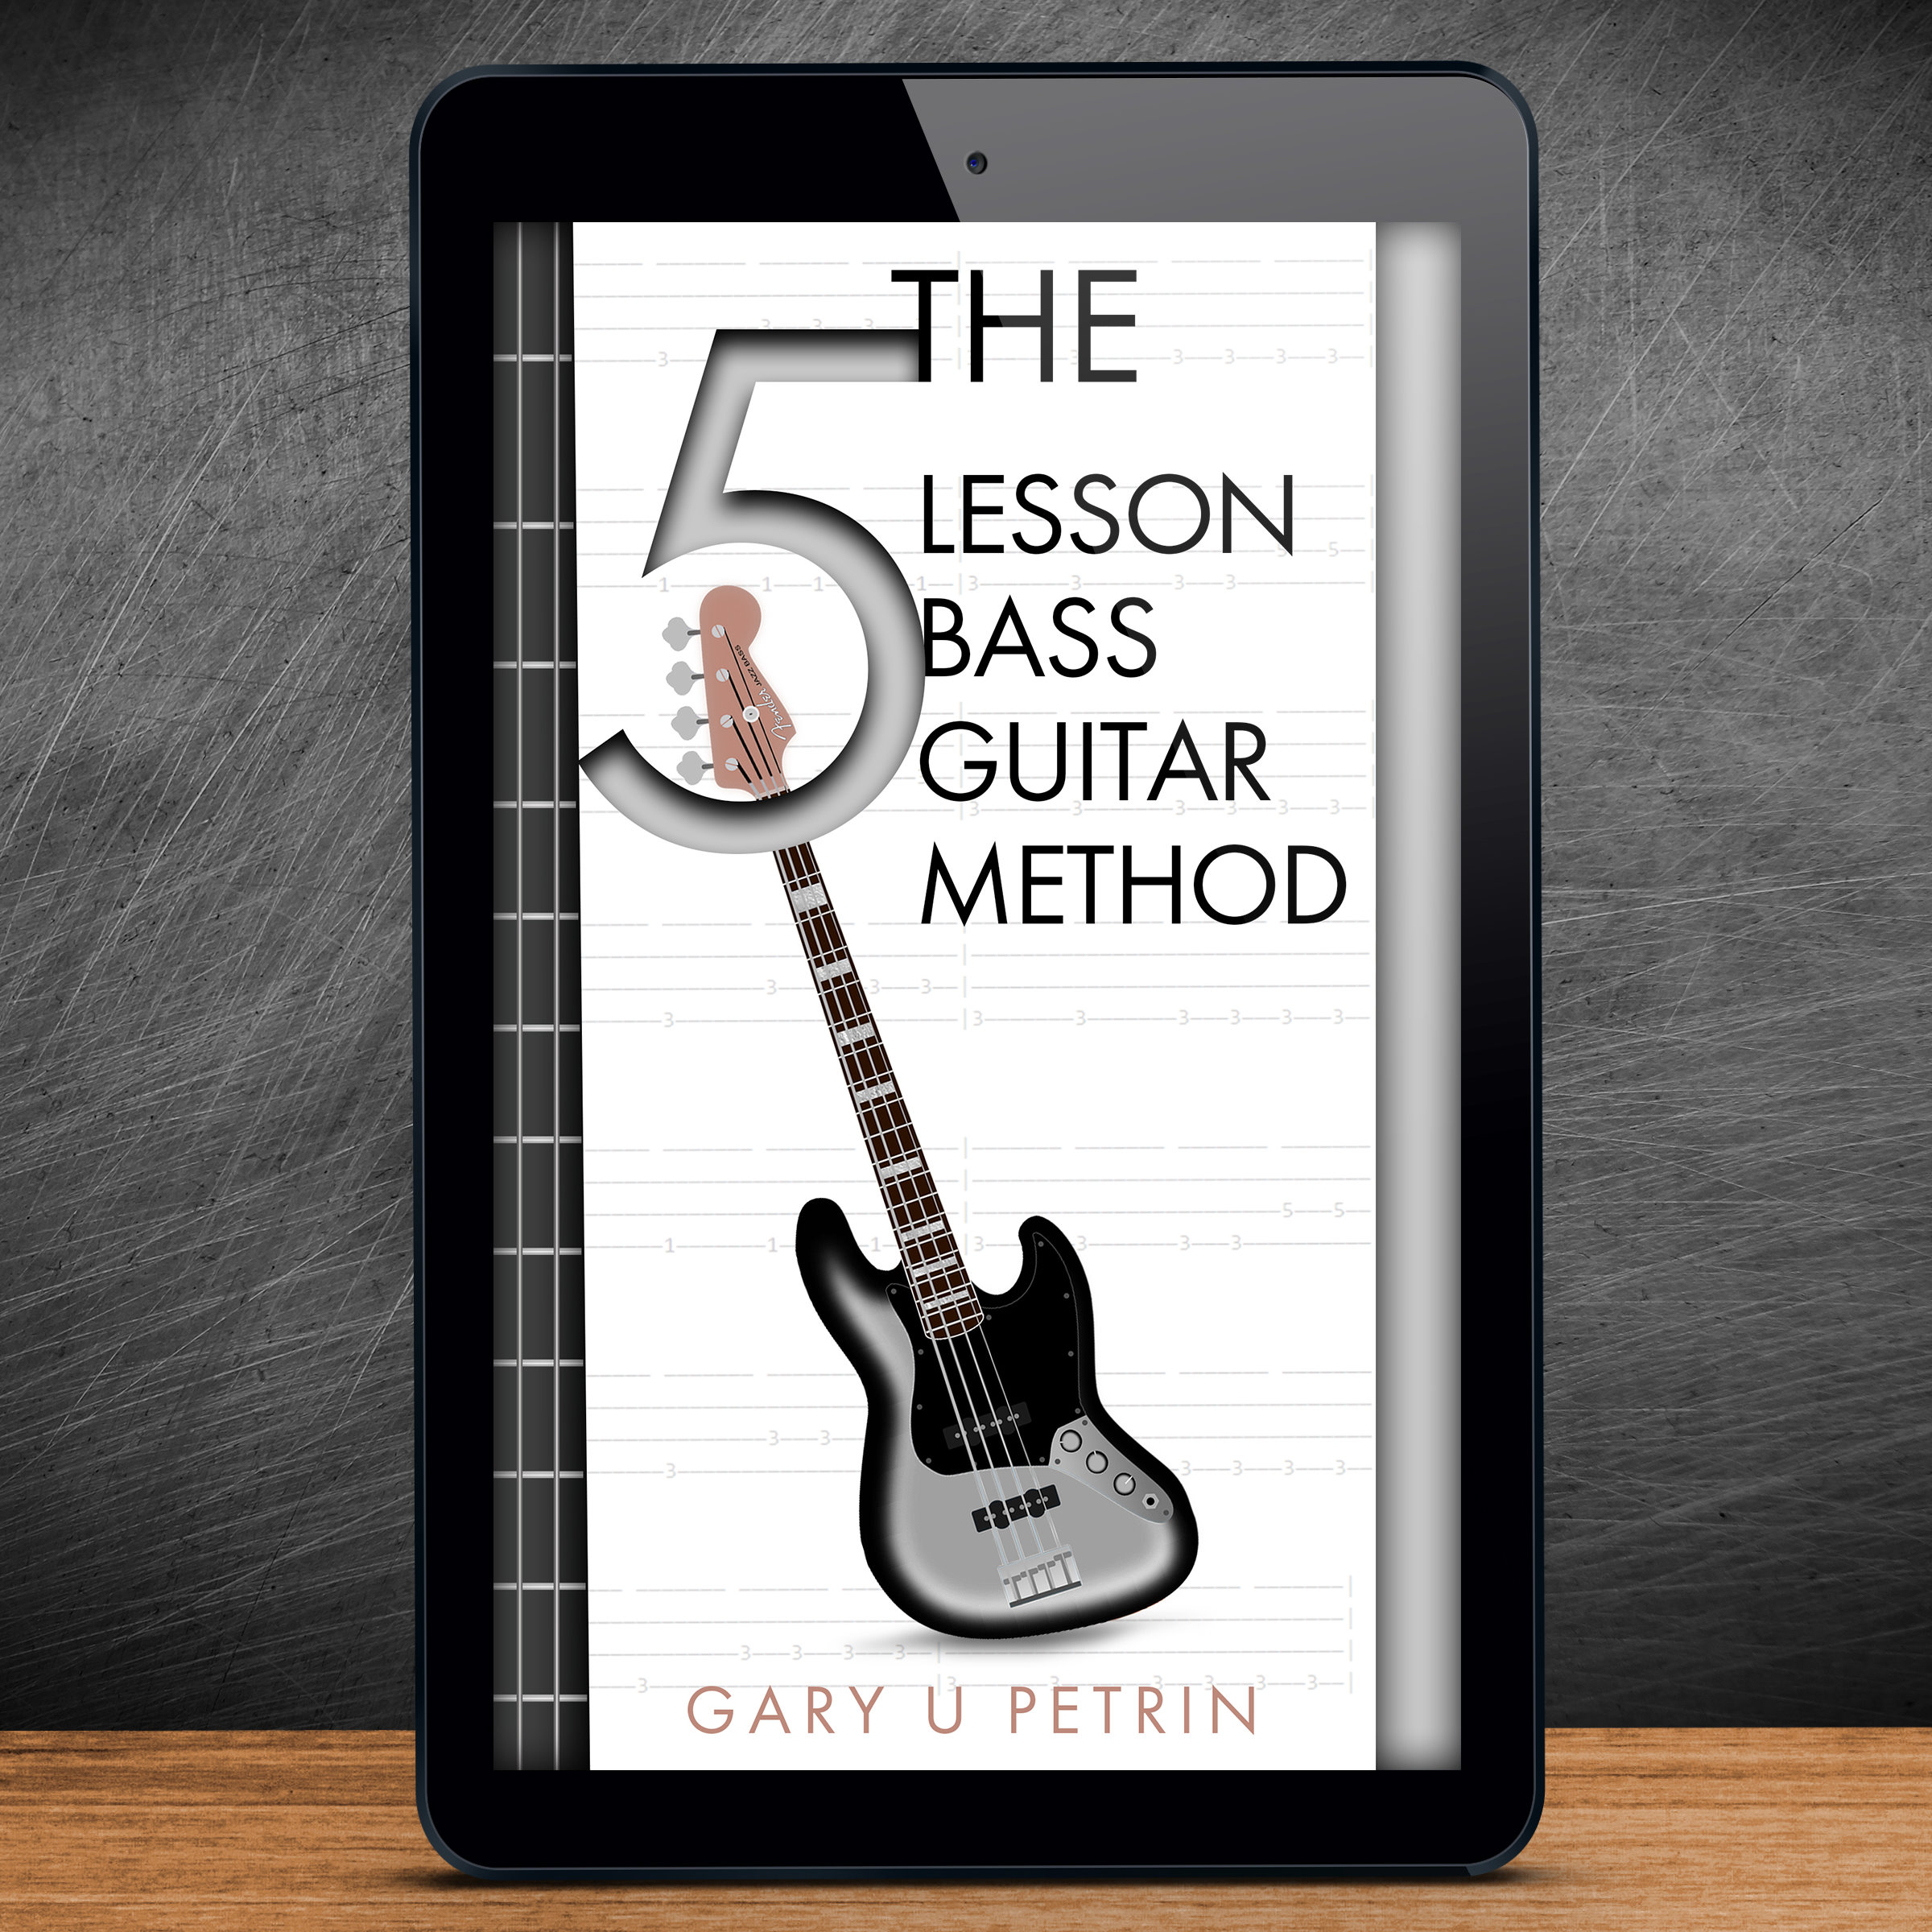 Bass Guitar Theory, Information and Handouts Teaching the Basics